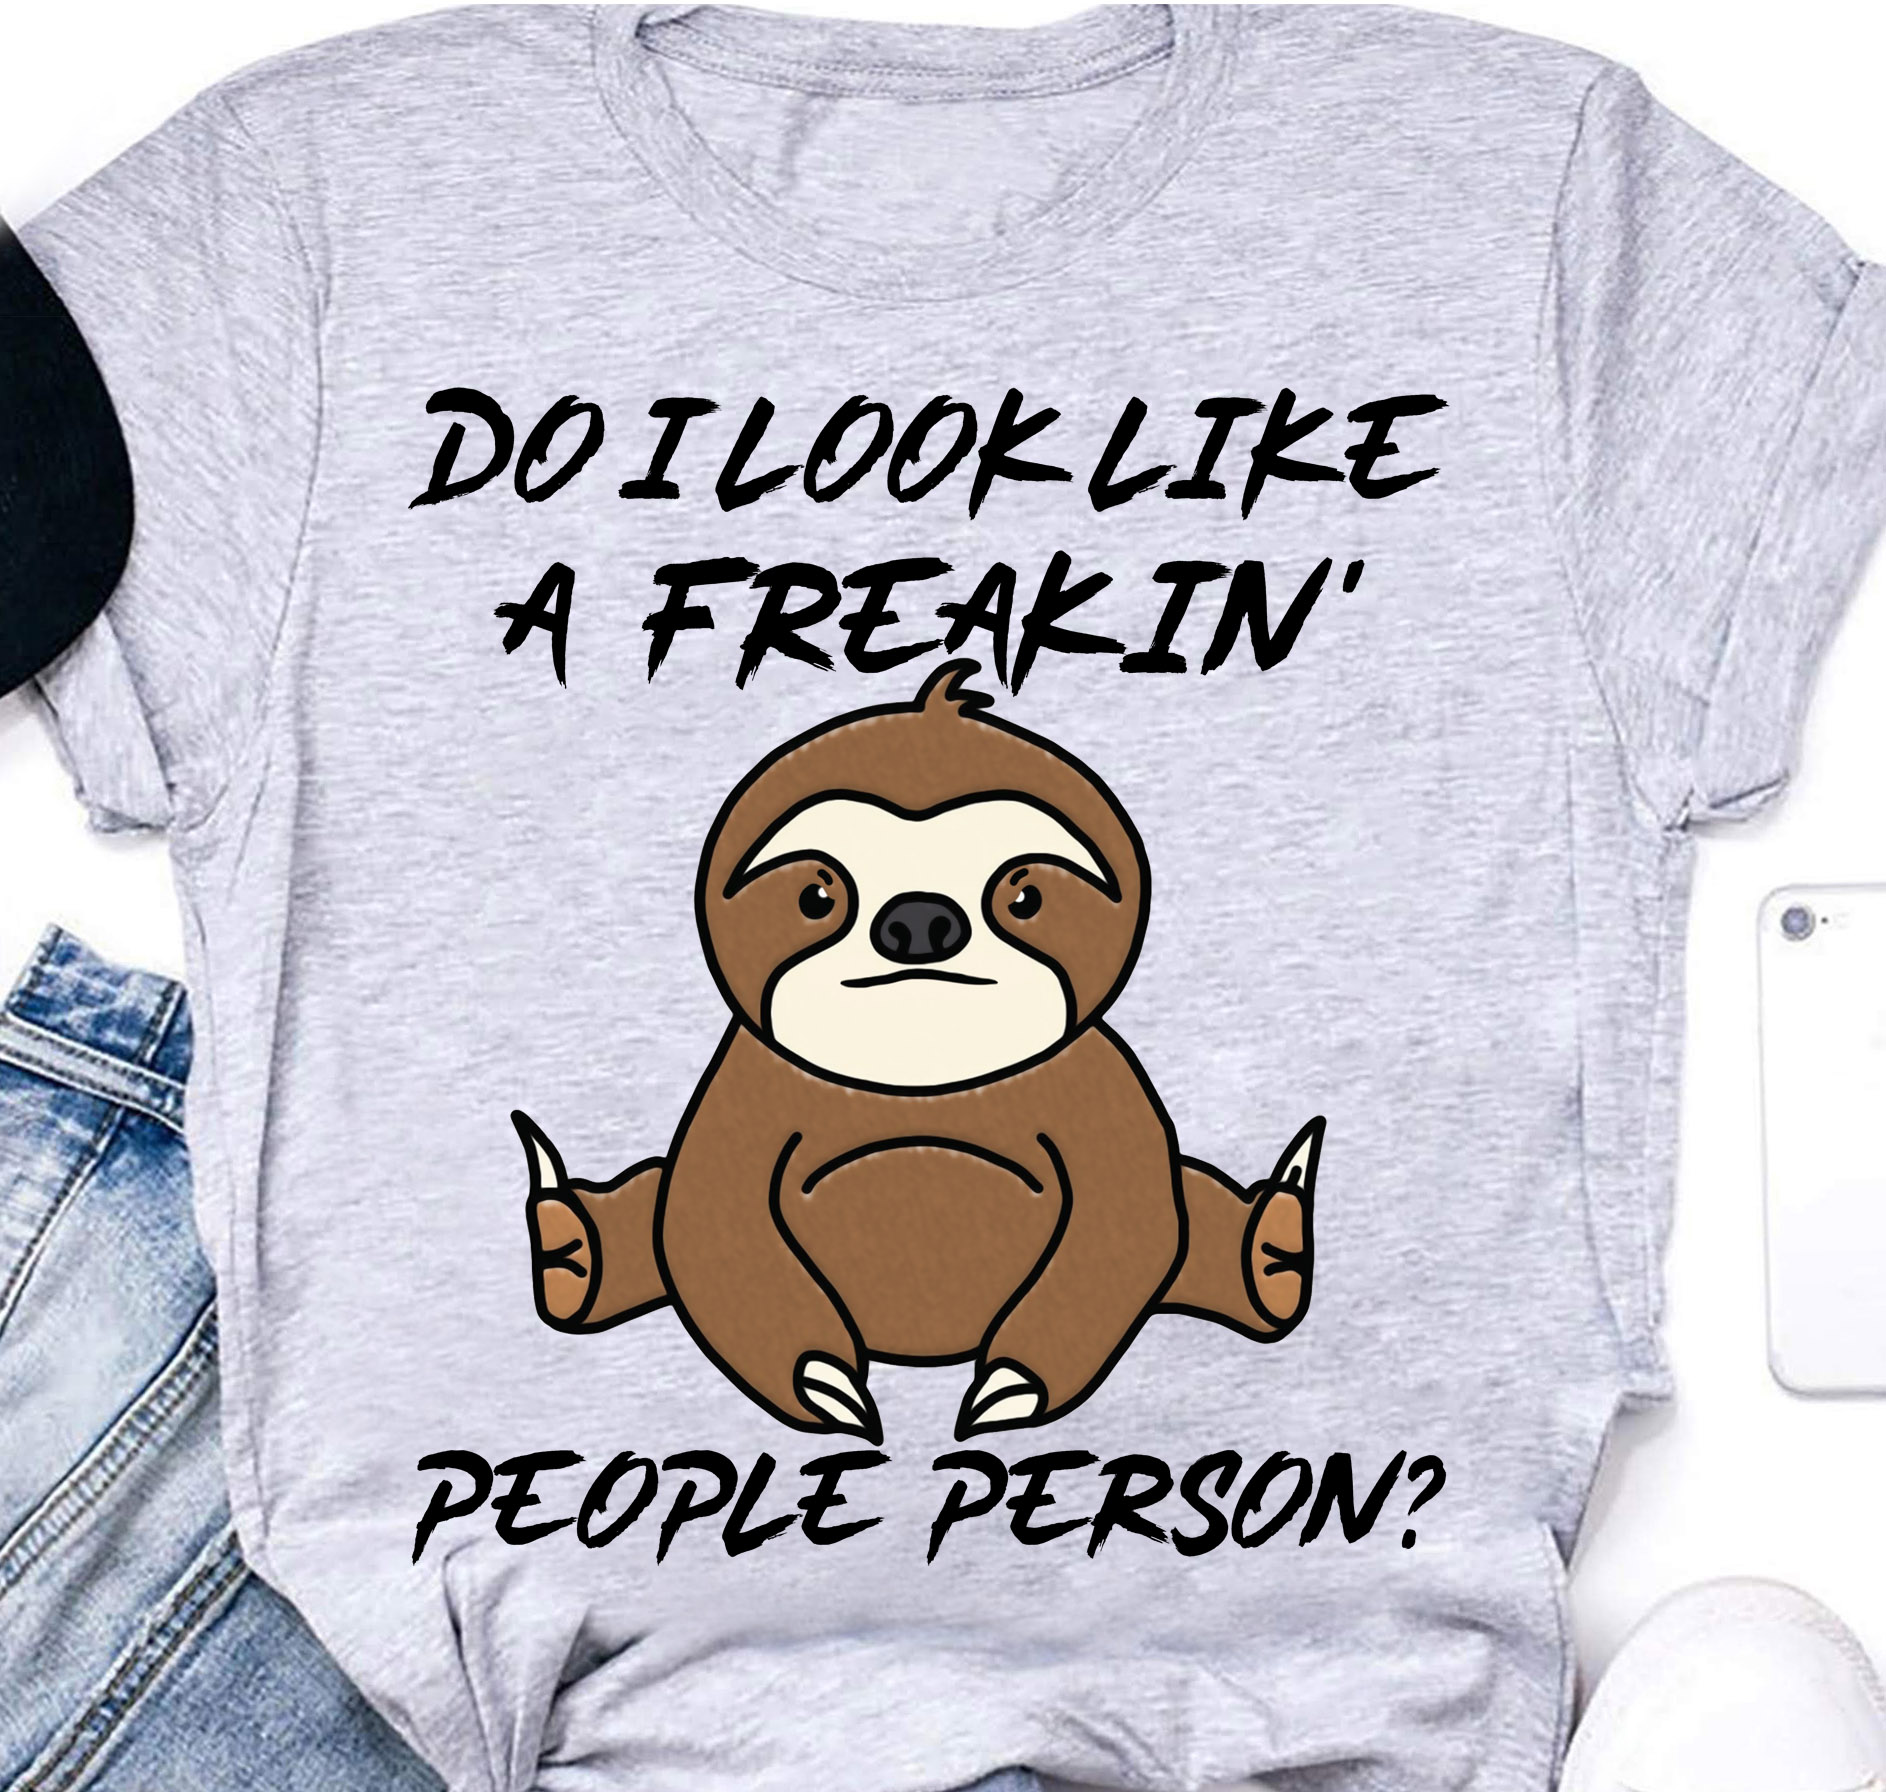 Do I look like a freakin people person - Sloth lover